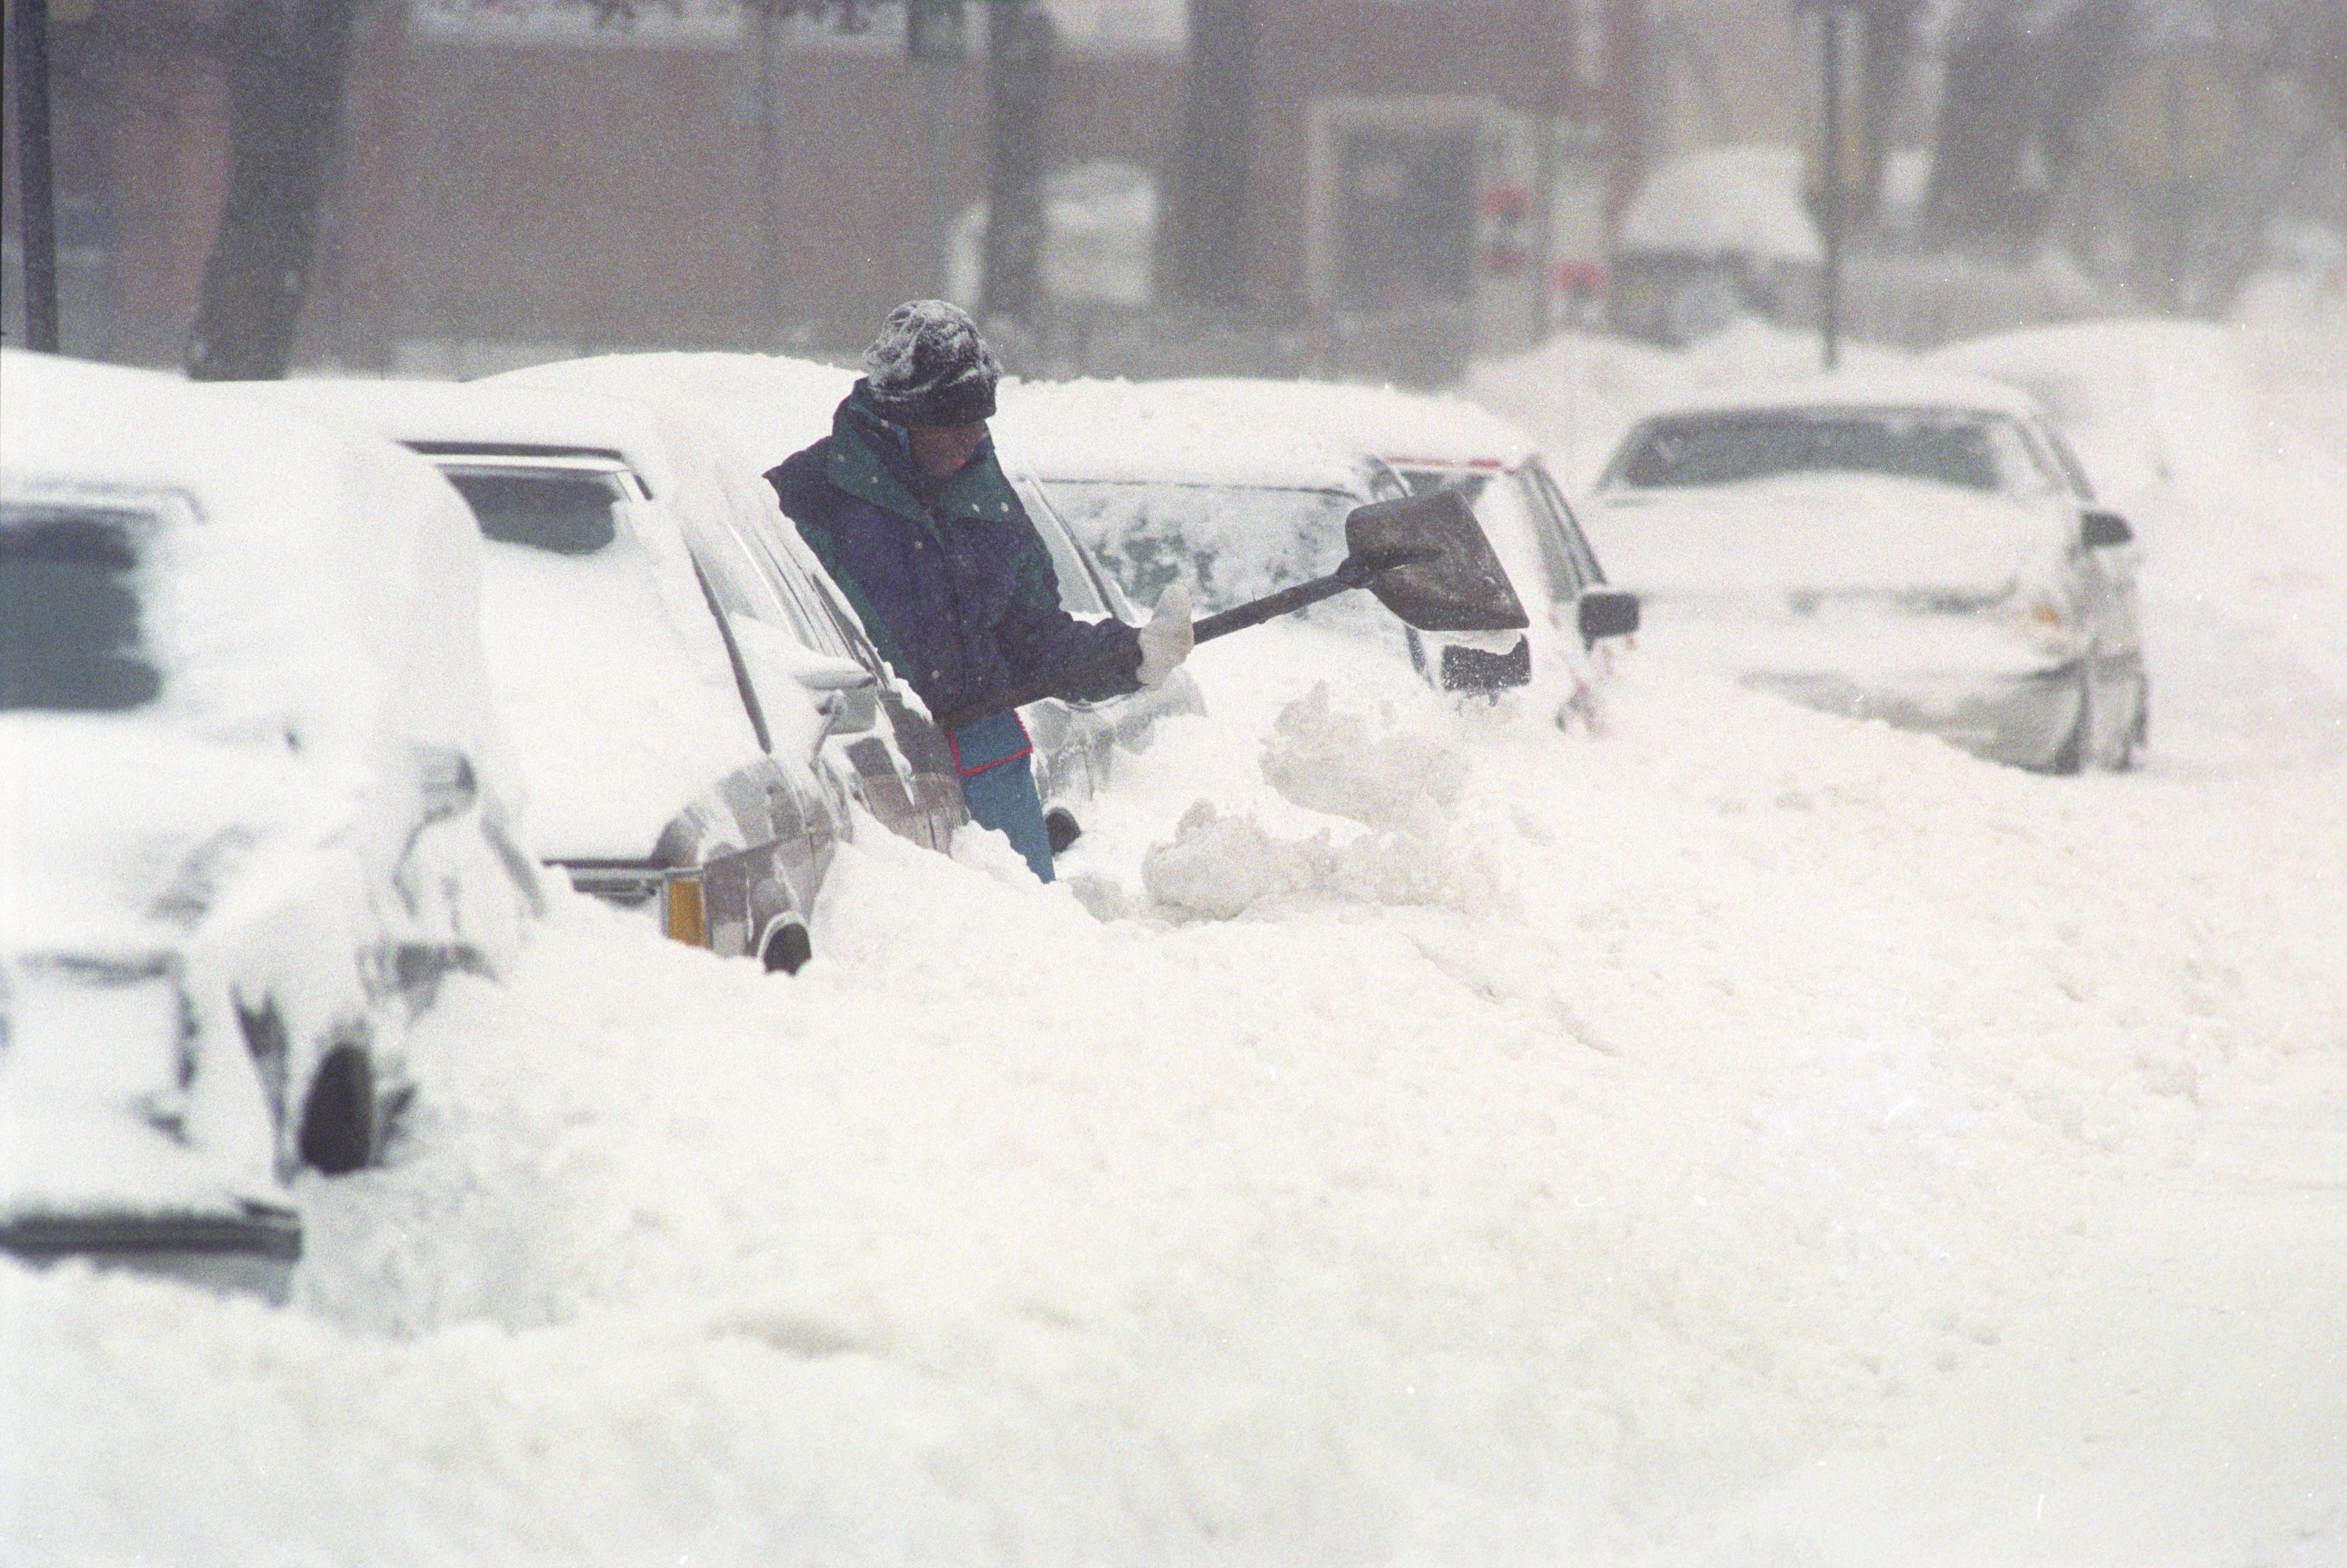 LaTaiva Escho shovels a path from his home along East Raynor Street in Syracuse. The Blizzard of 1993 storm dumped some 40 inches of snow on the area. Nicholas Lisi / The Post-Standard